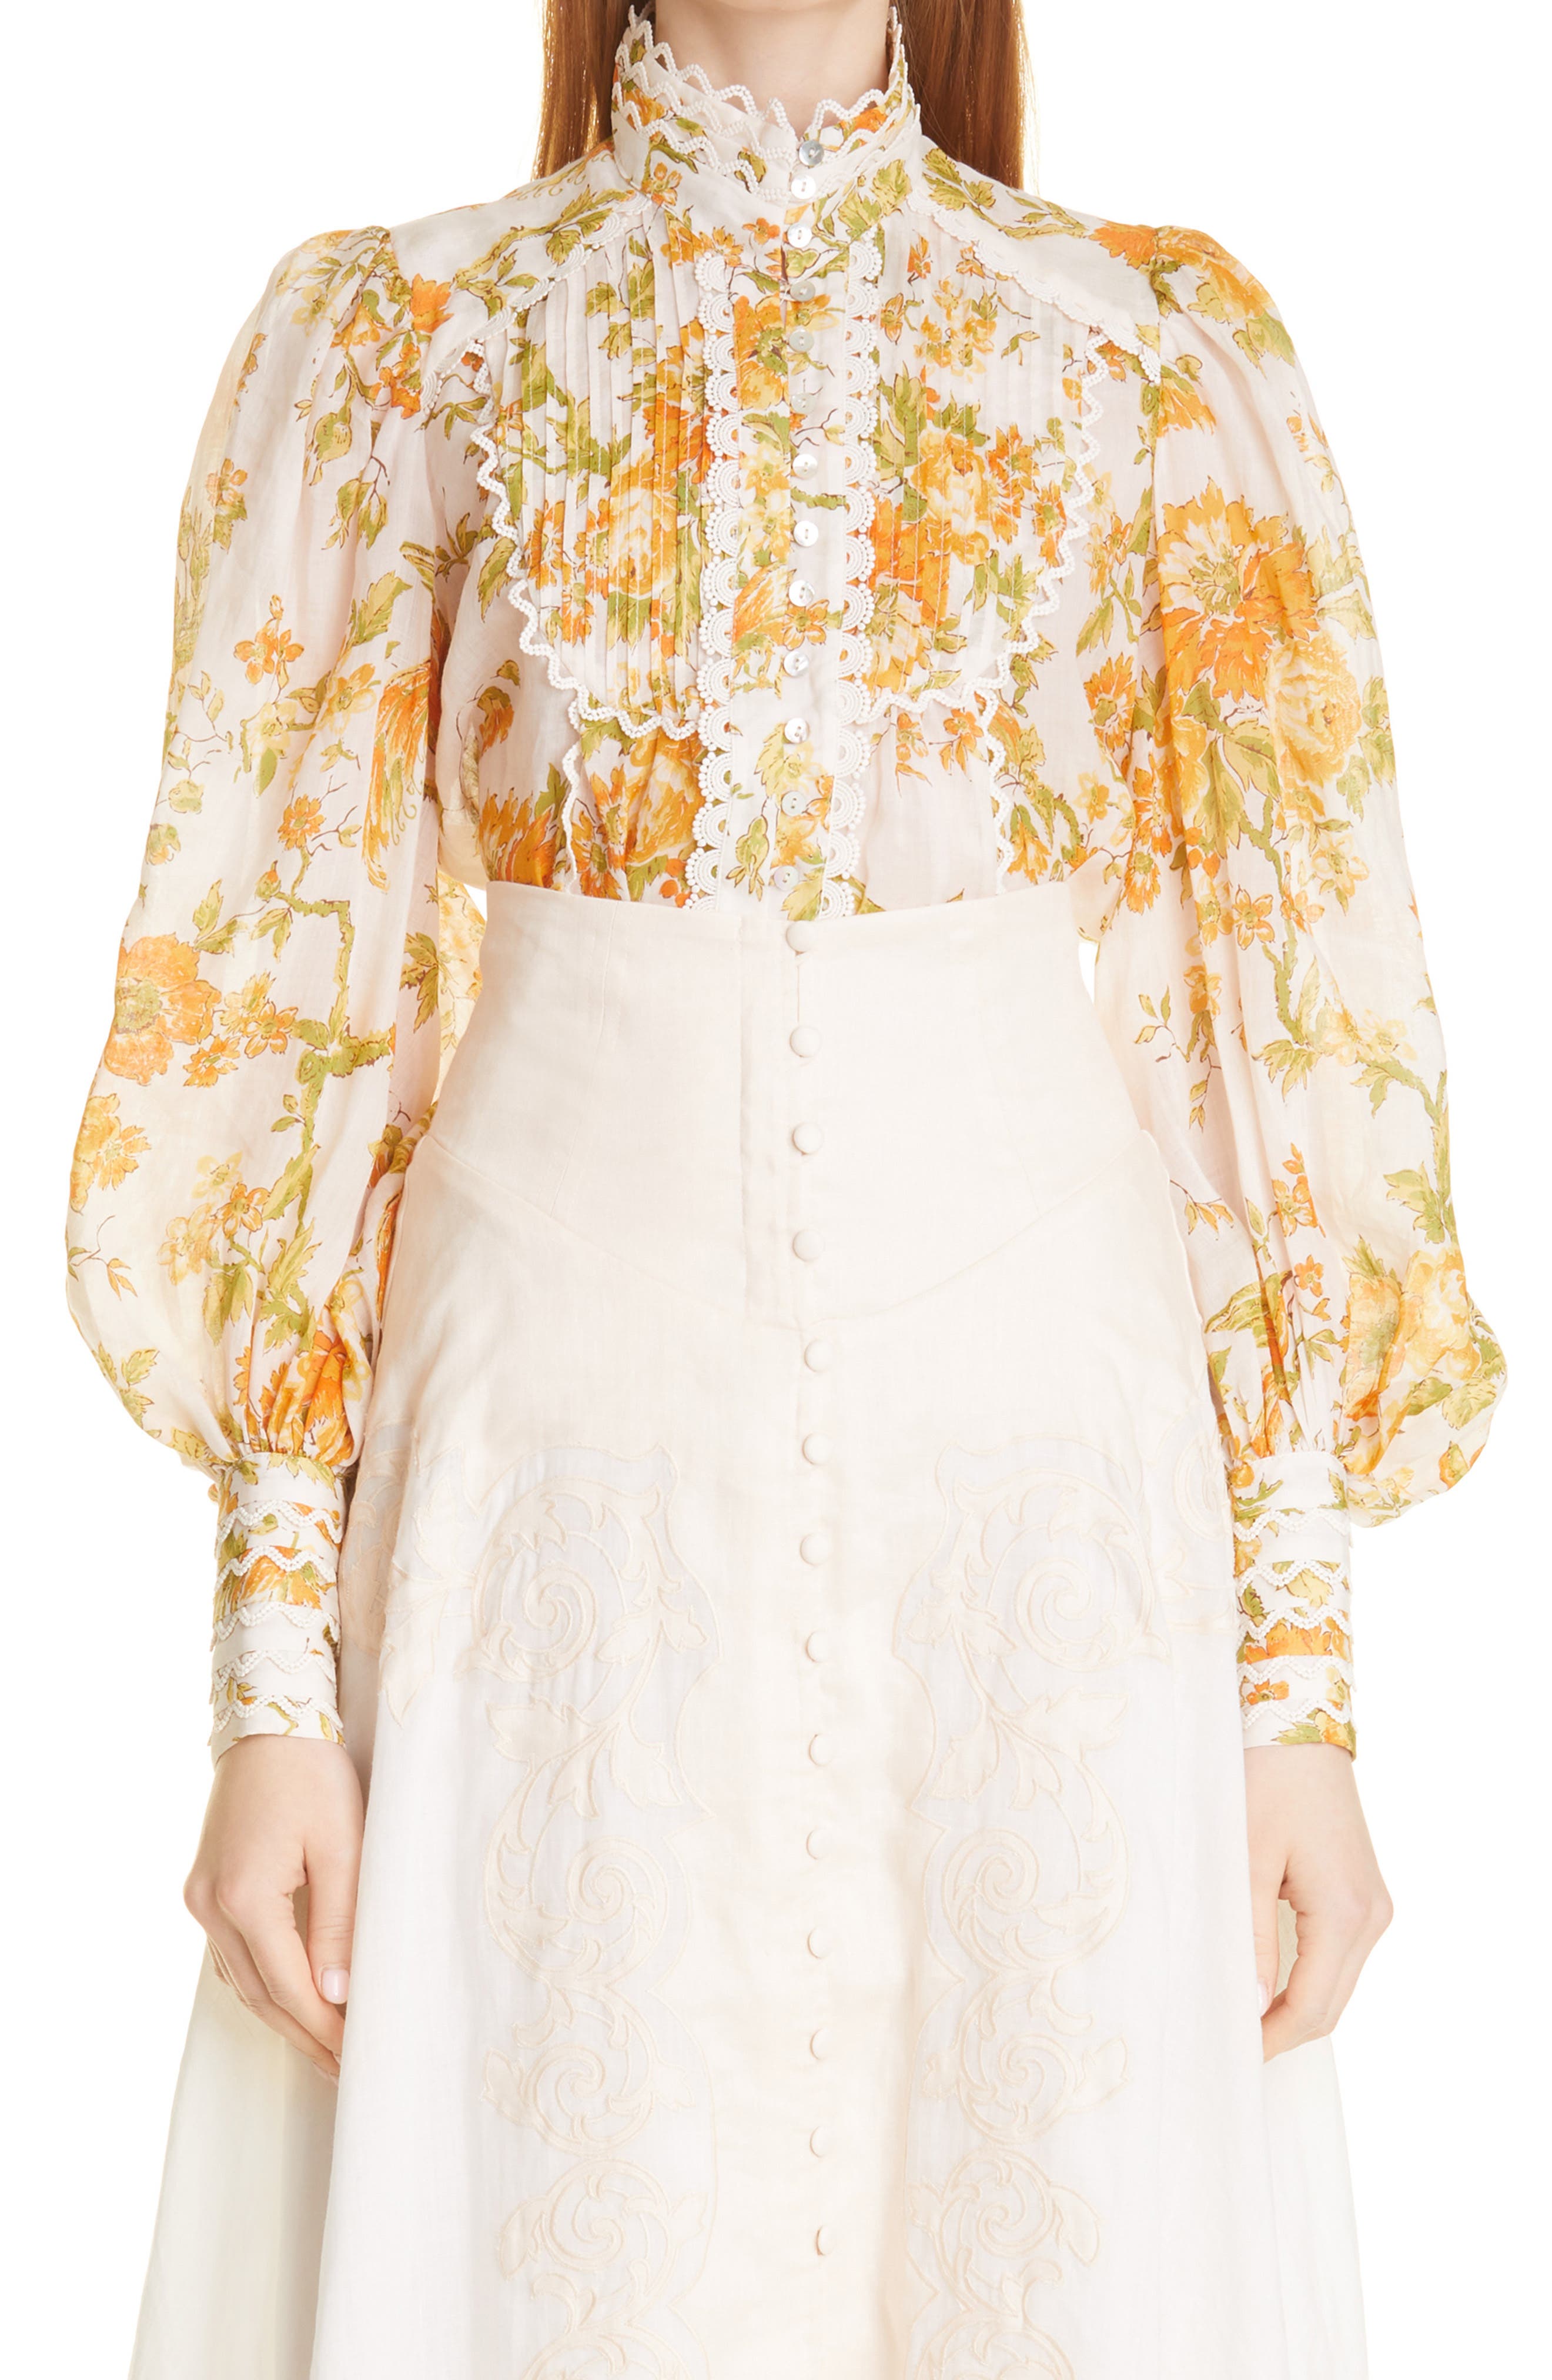 ALEMAIS Songbird Print Balloon Sleeve Blouse in Citrus at Nordstrom, Size 8